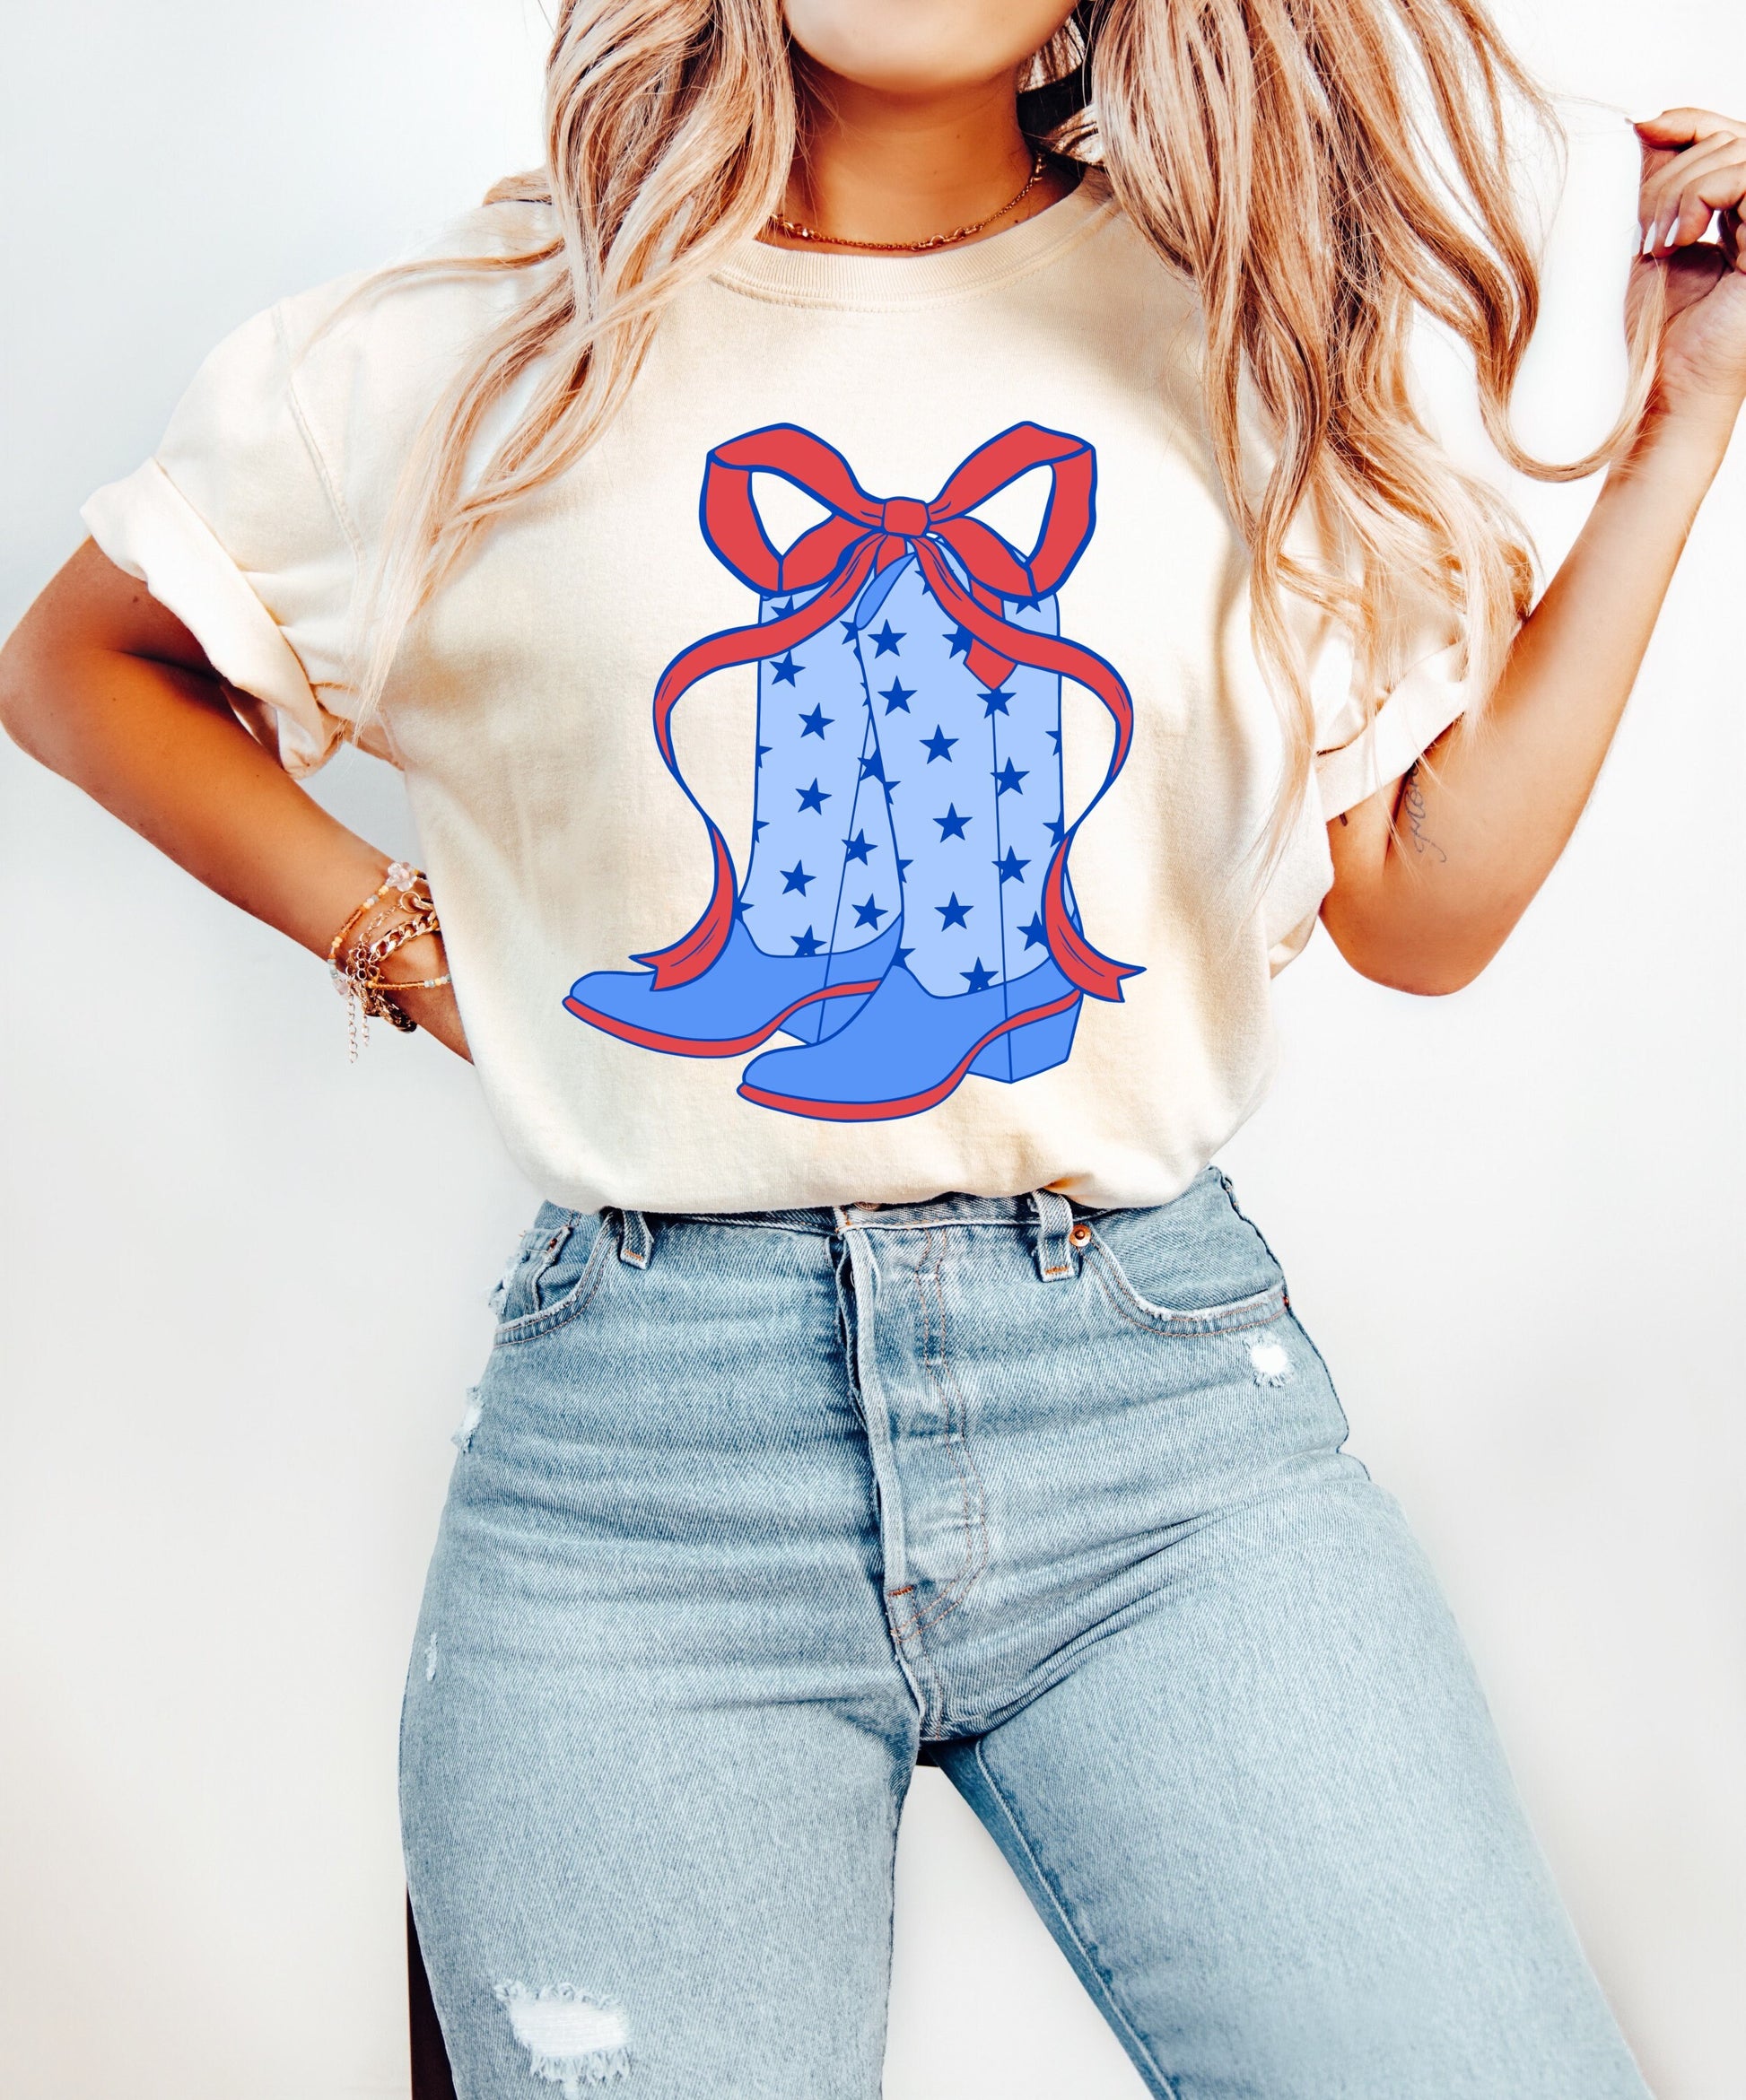 Cowgirl Boots July 4th Shirt, Coquette 4th of July Shirt, Retro 4th of July Shirt, Comfort Colors® Shirt, Summertime Tee, Coquette Cowgirl